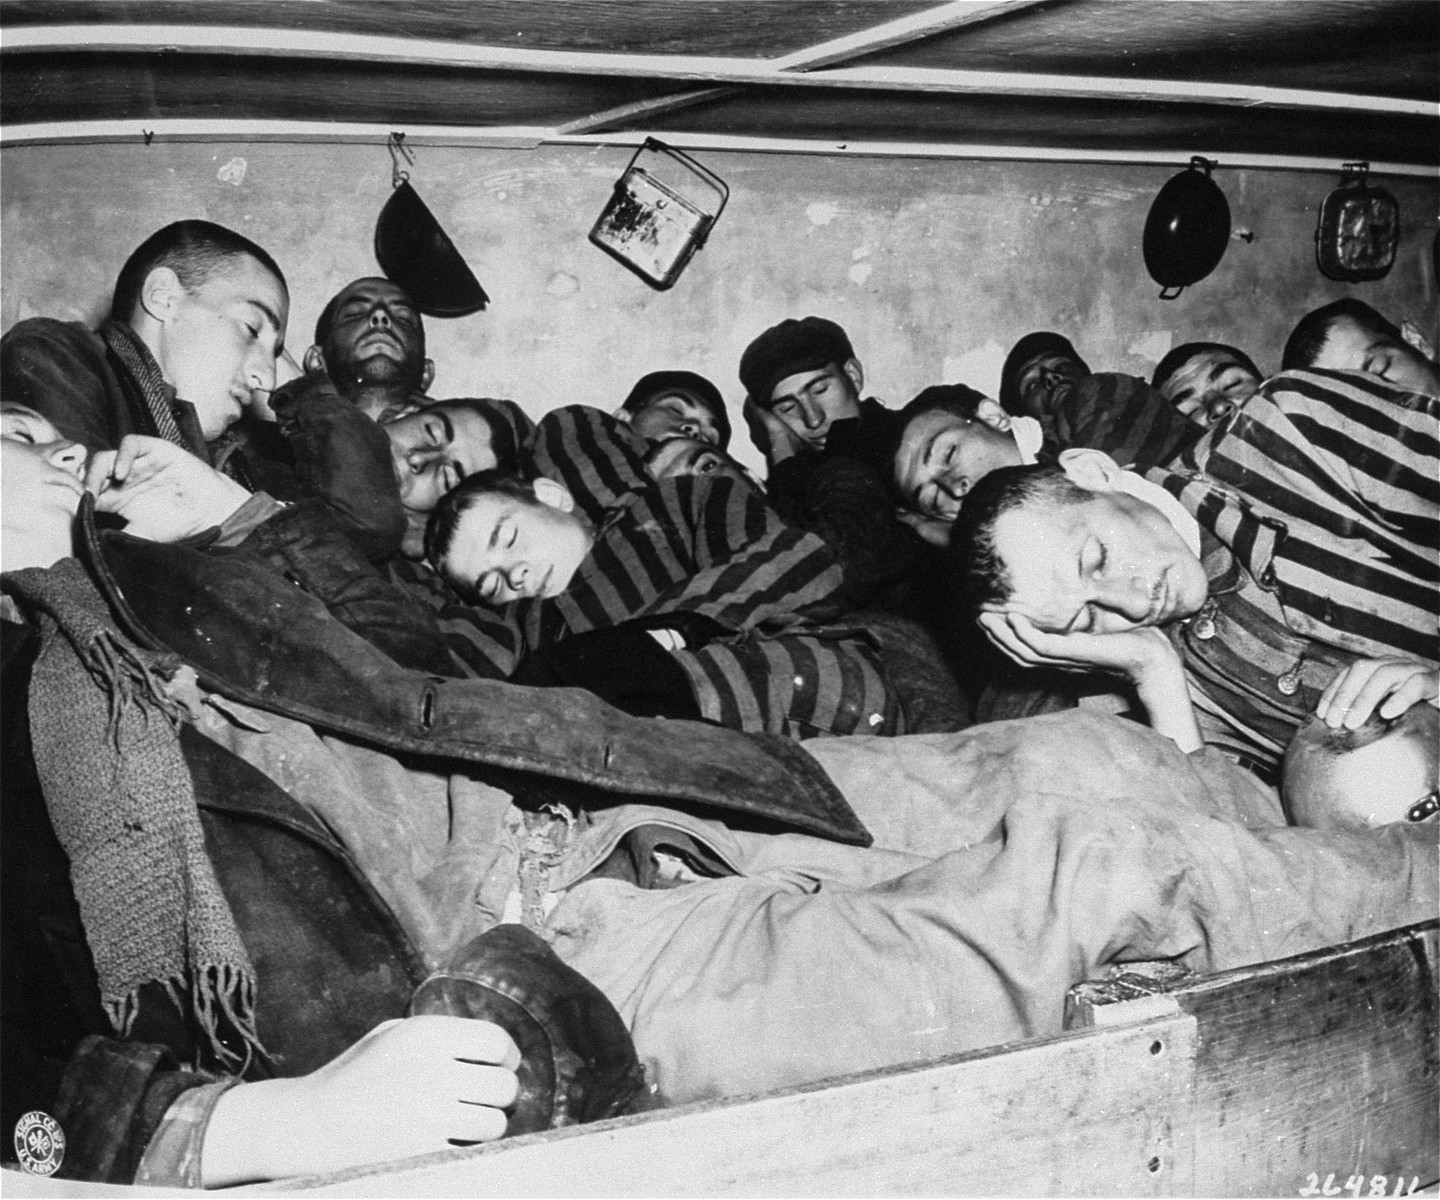 Survivors in Dachau packed into overcrowded sleeping quarters, where 7 men  had to share 2 small